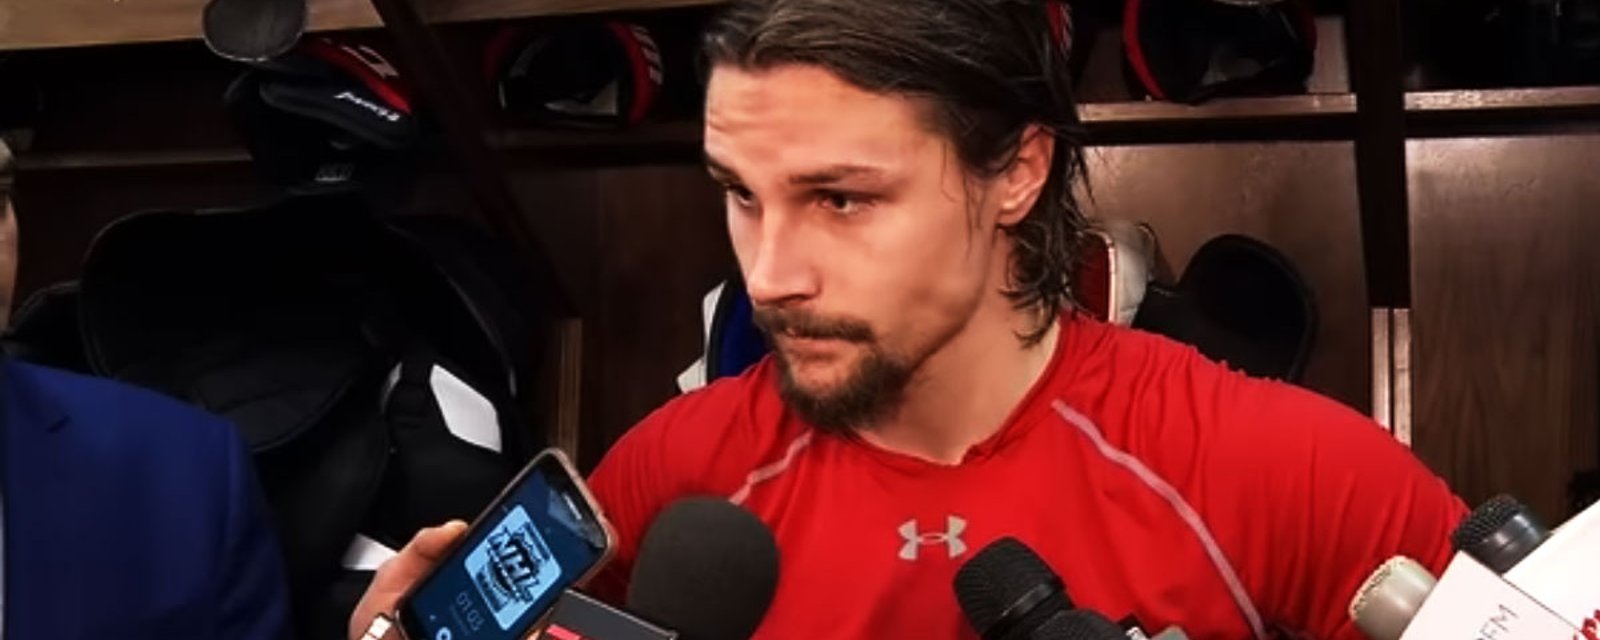 Karlsson: “he tried to pitchfork me in the face”